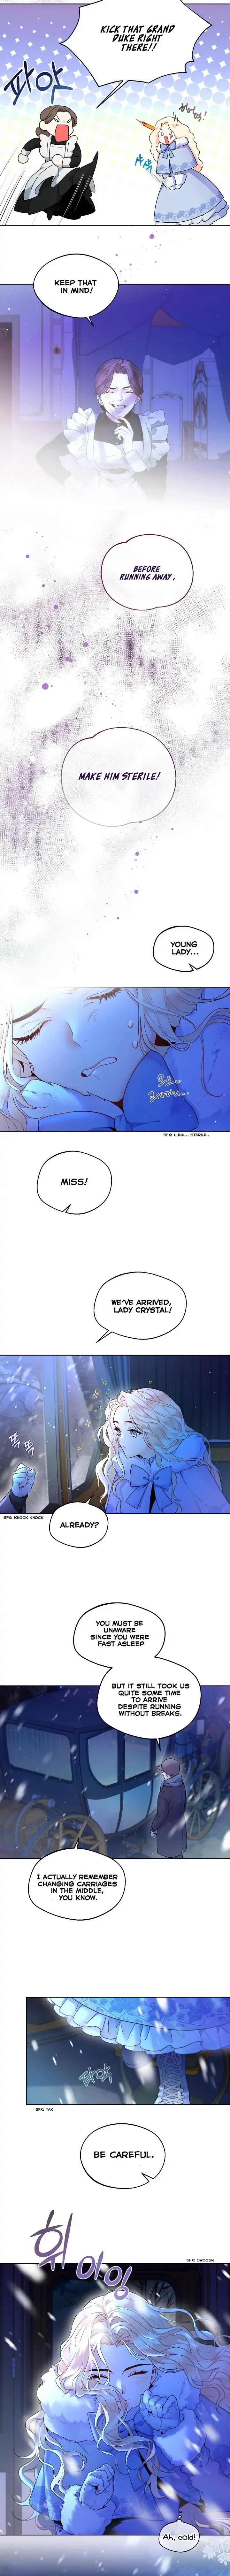 Lady Crystal Is A Man - Page 4